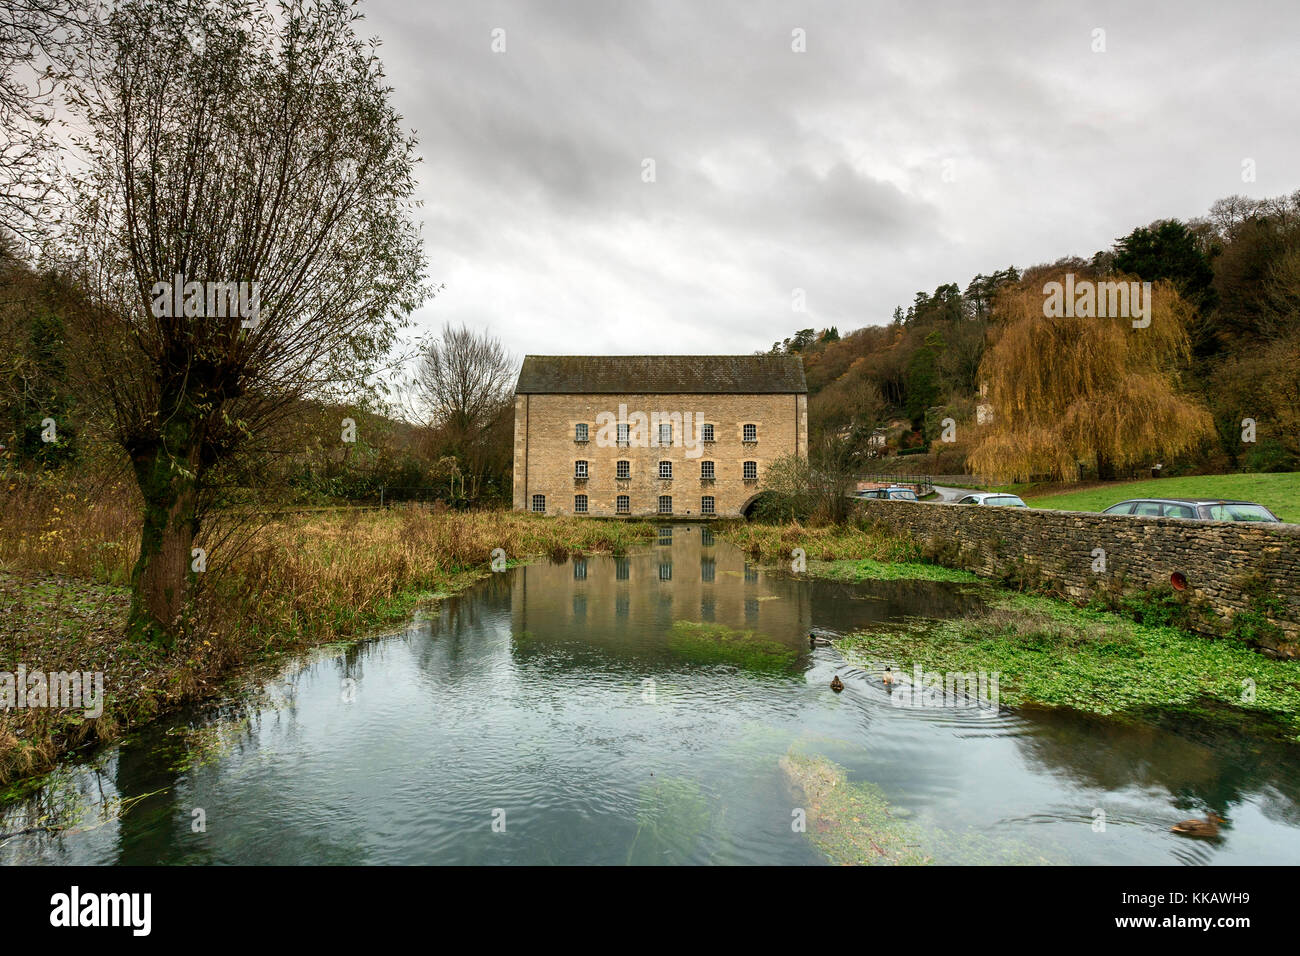 Belvedere Mill, an old Cotswold stone mill in the Chalford Valley near Stroud, Gloucestershire. Stock Photo